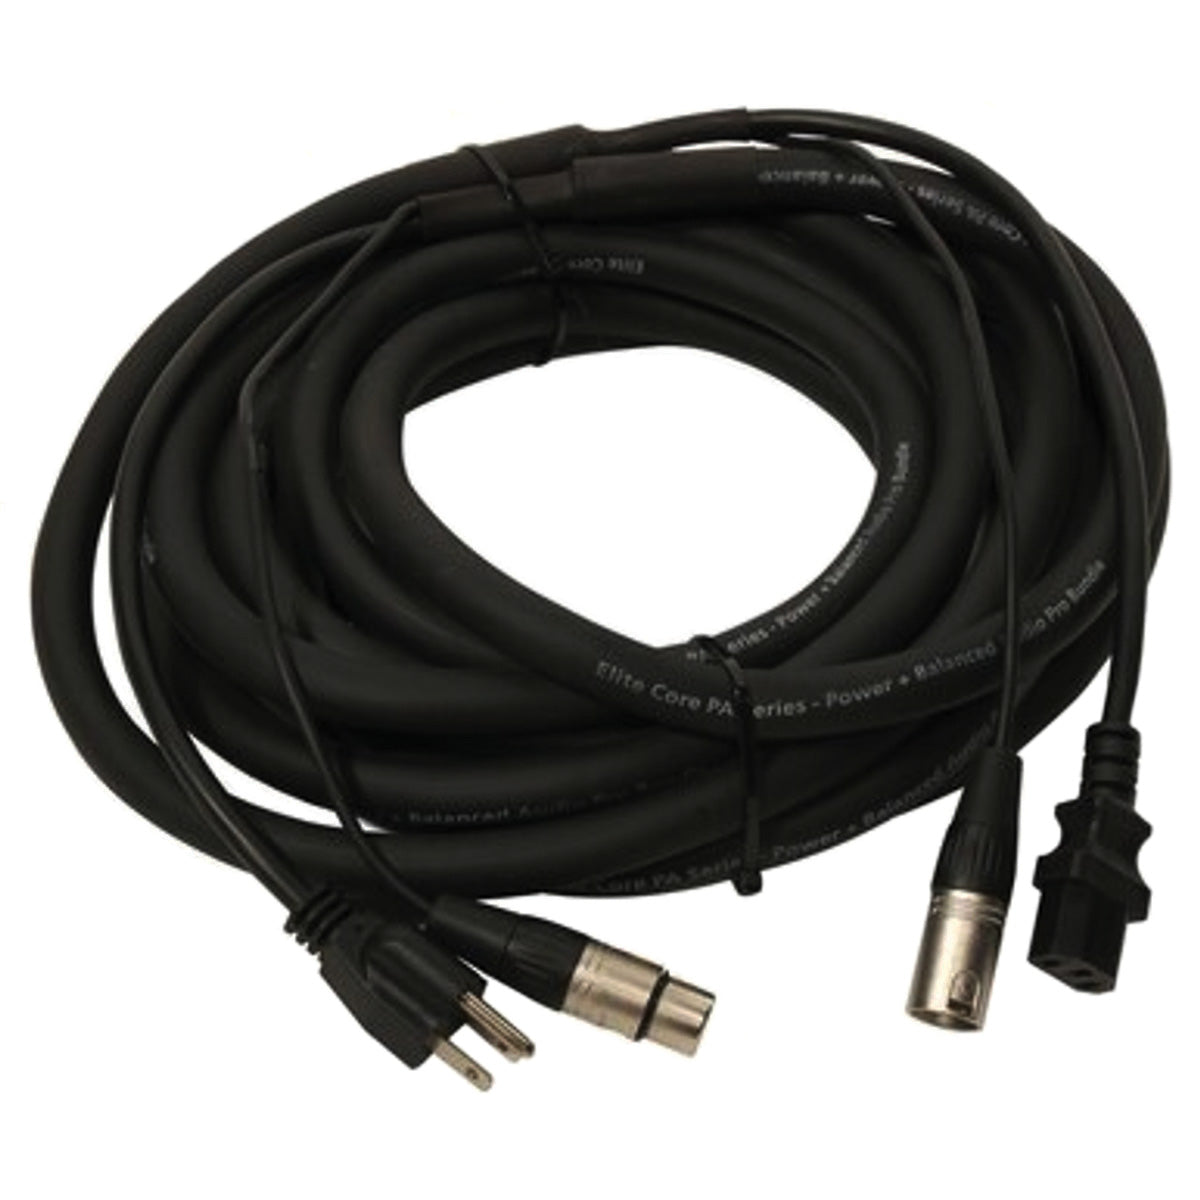 Powered Speaker Cables